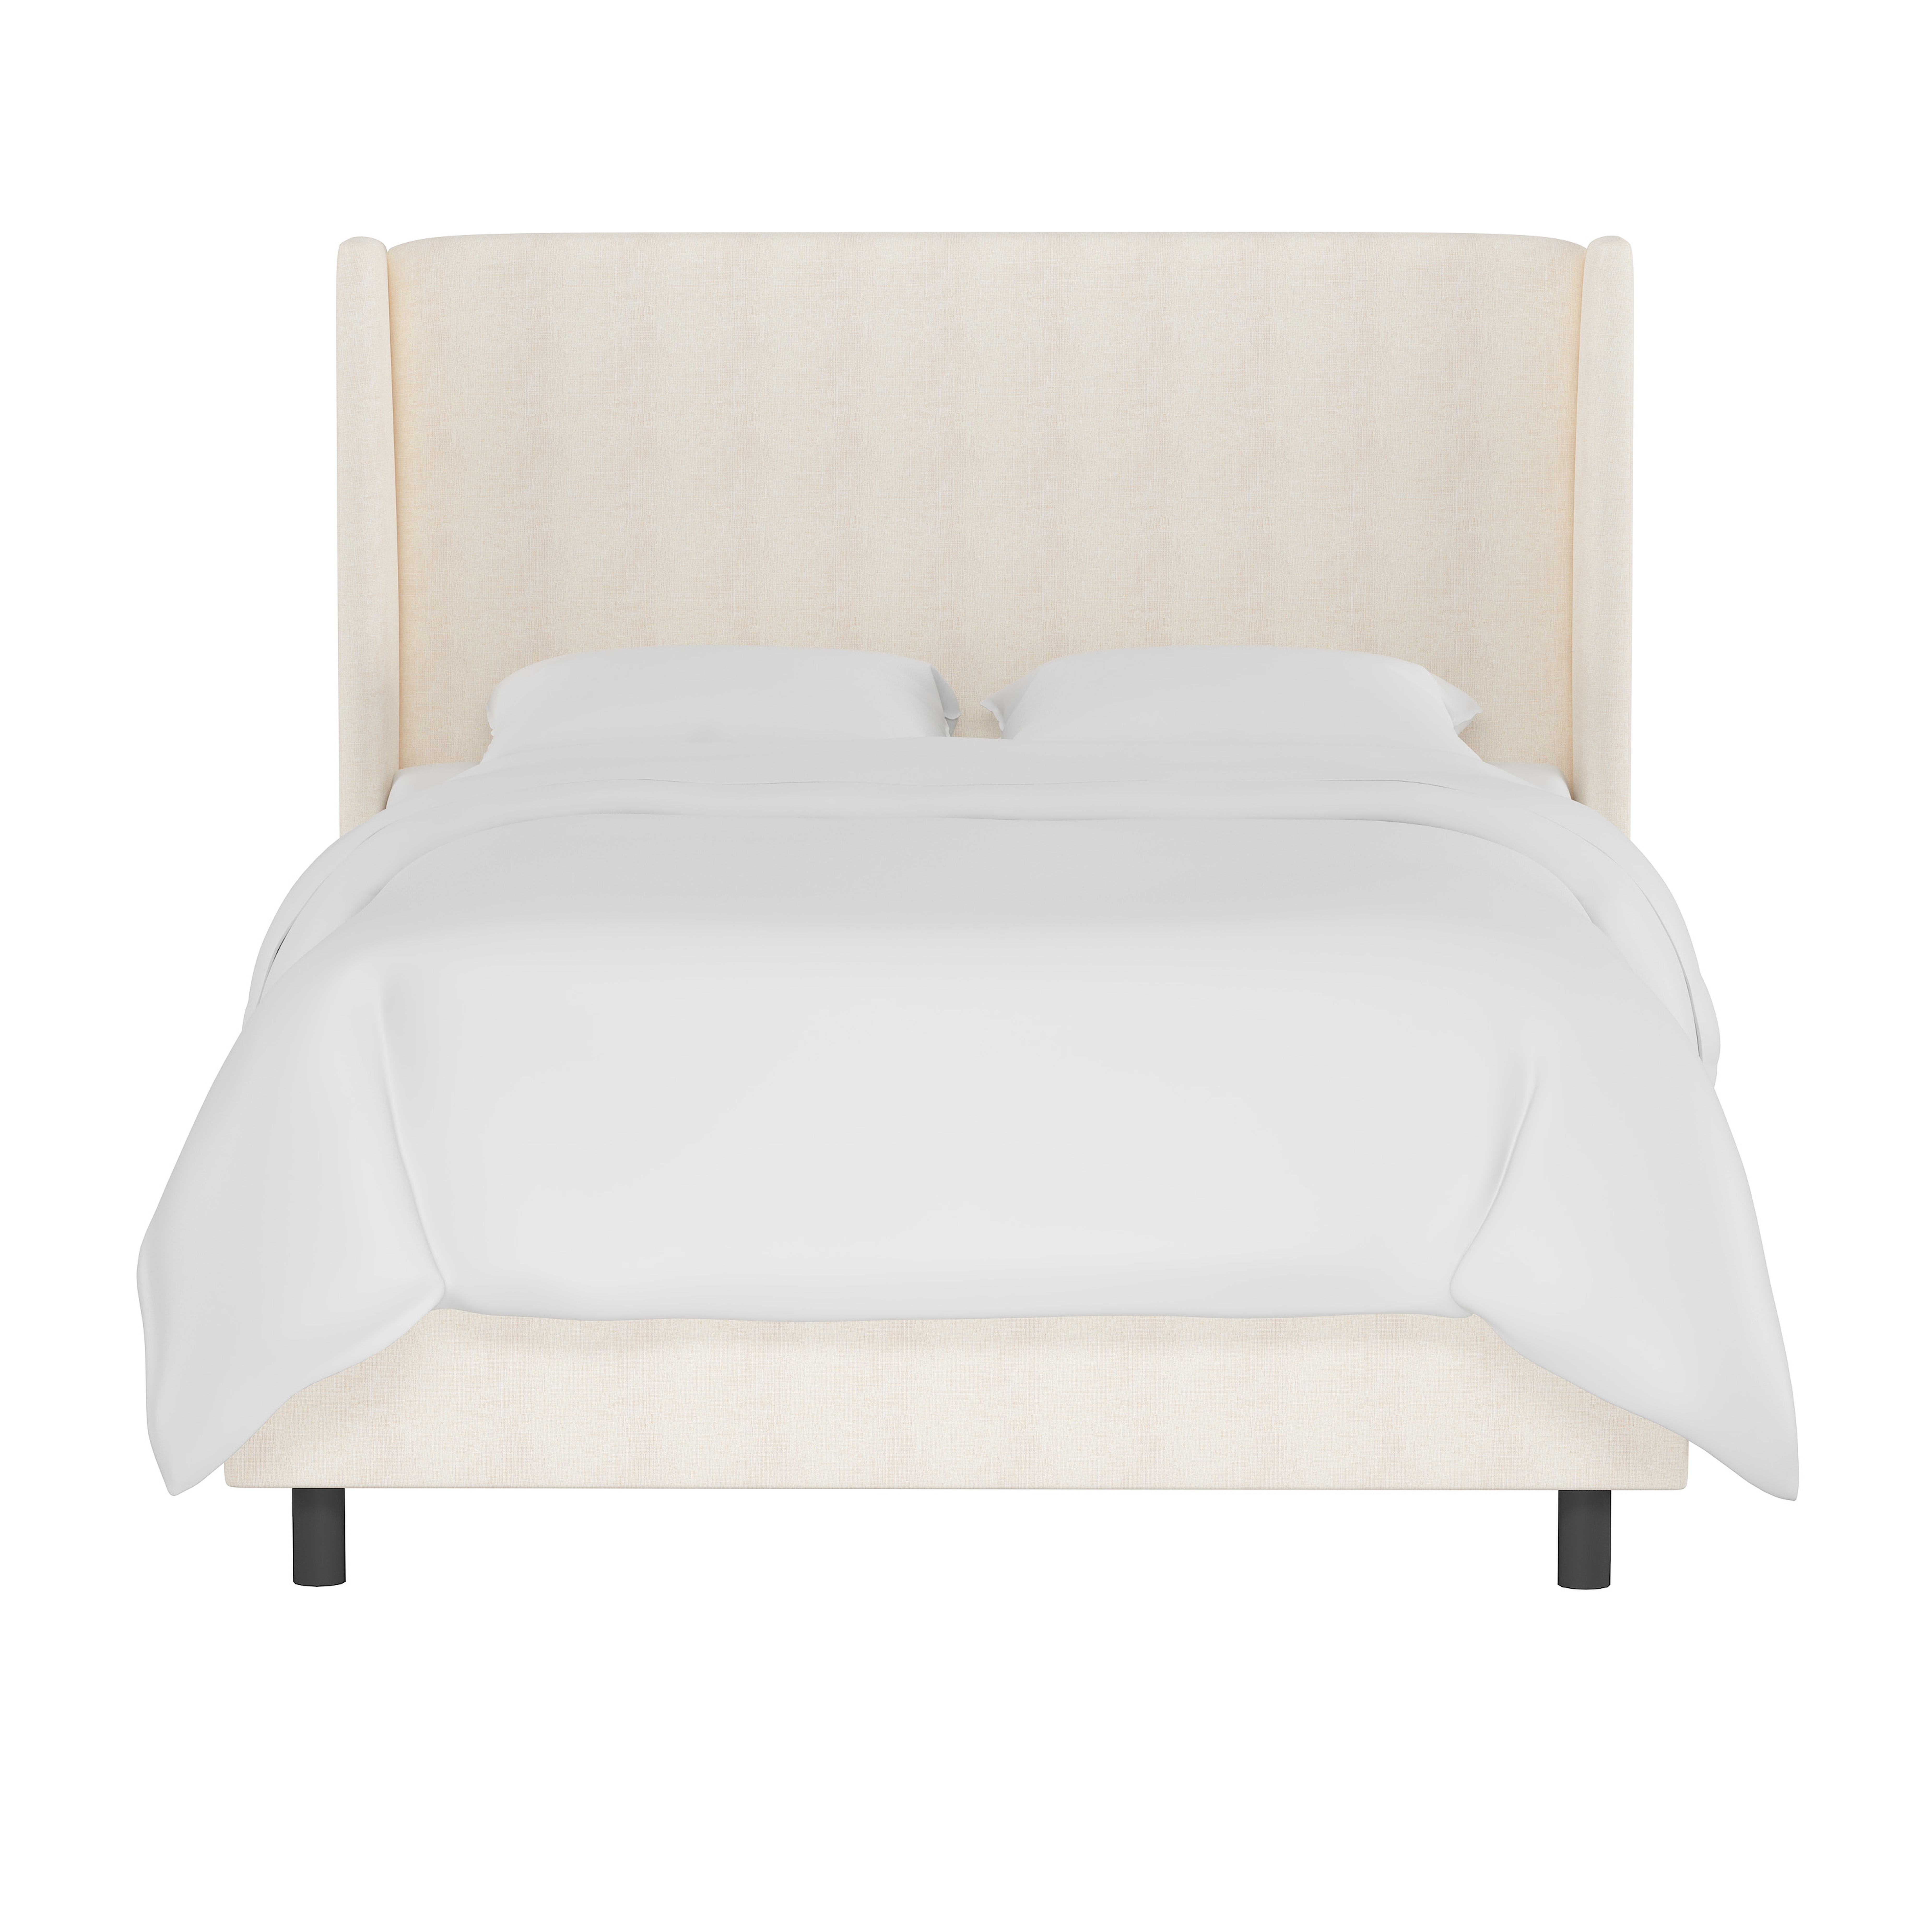 Bannock Wingback Bed, Queen, White - Cove Goods